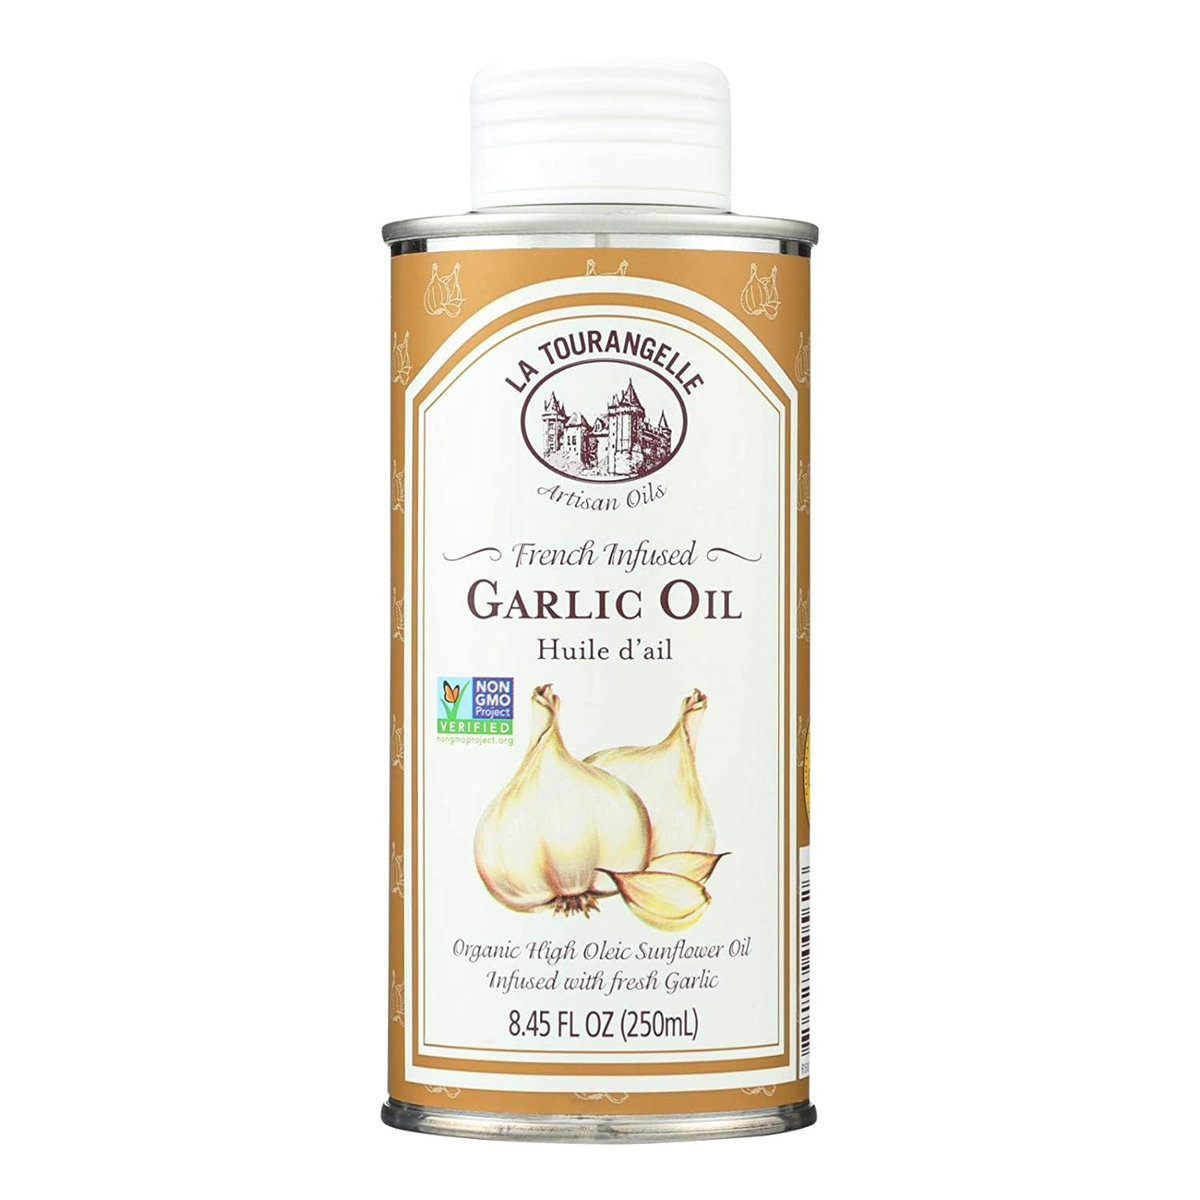 La Tour - French Infused Garlic Oil - 250ml